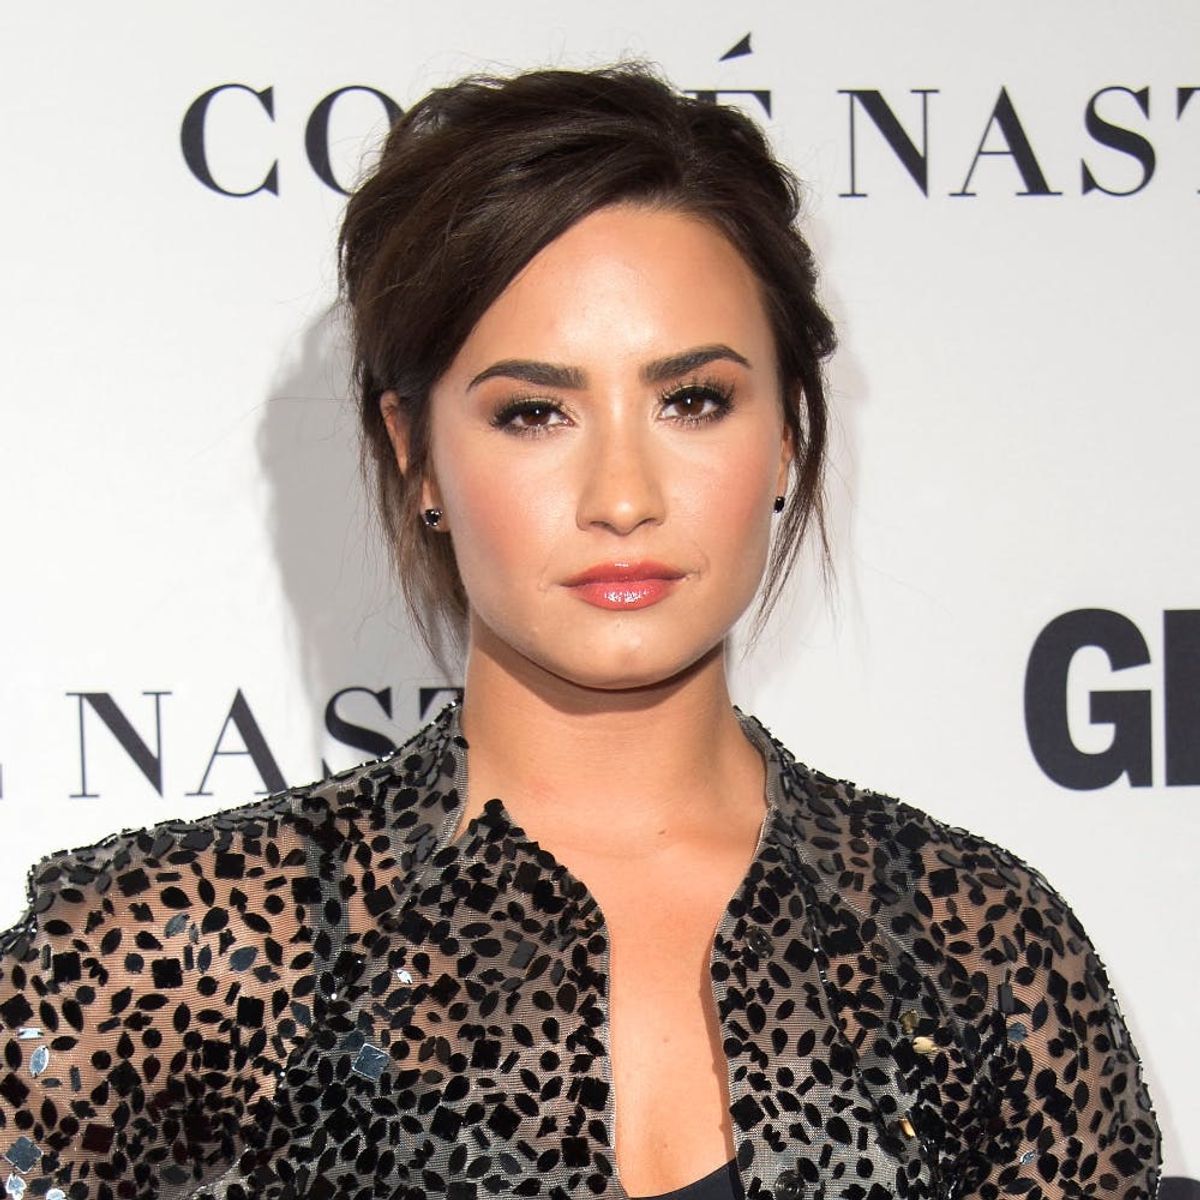 Demi Lovato’s $8.3 Million Home Is in Danger of Getting Destroyed by Mudslides